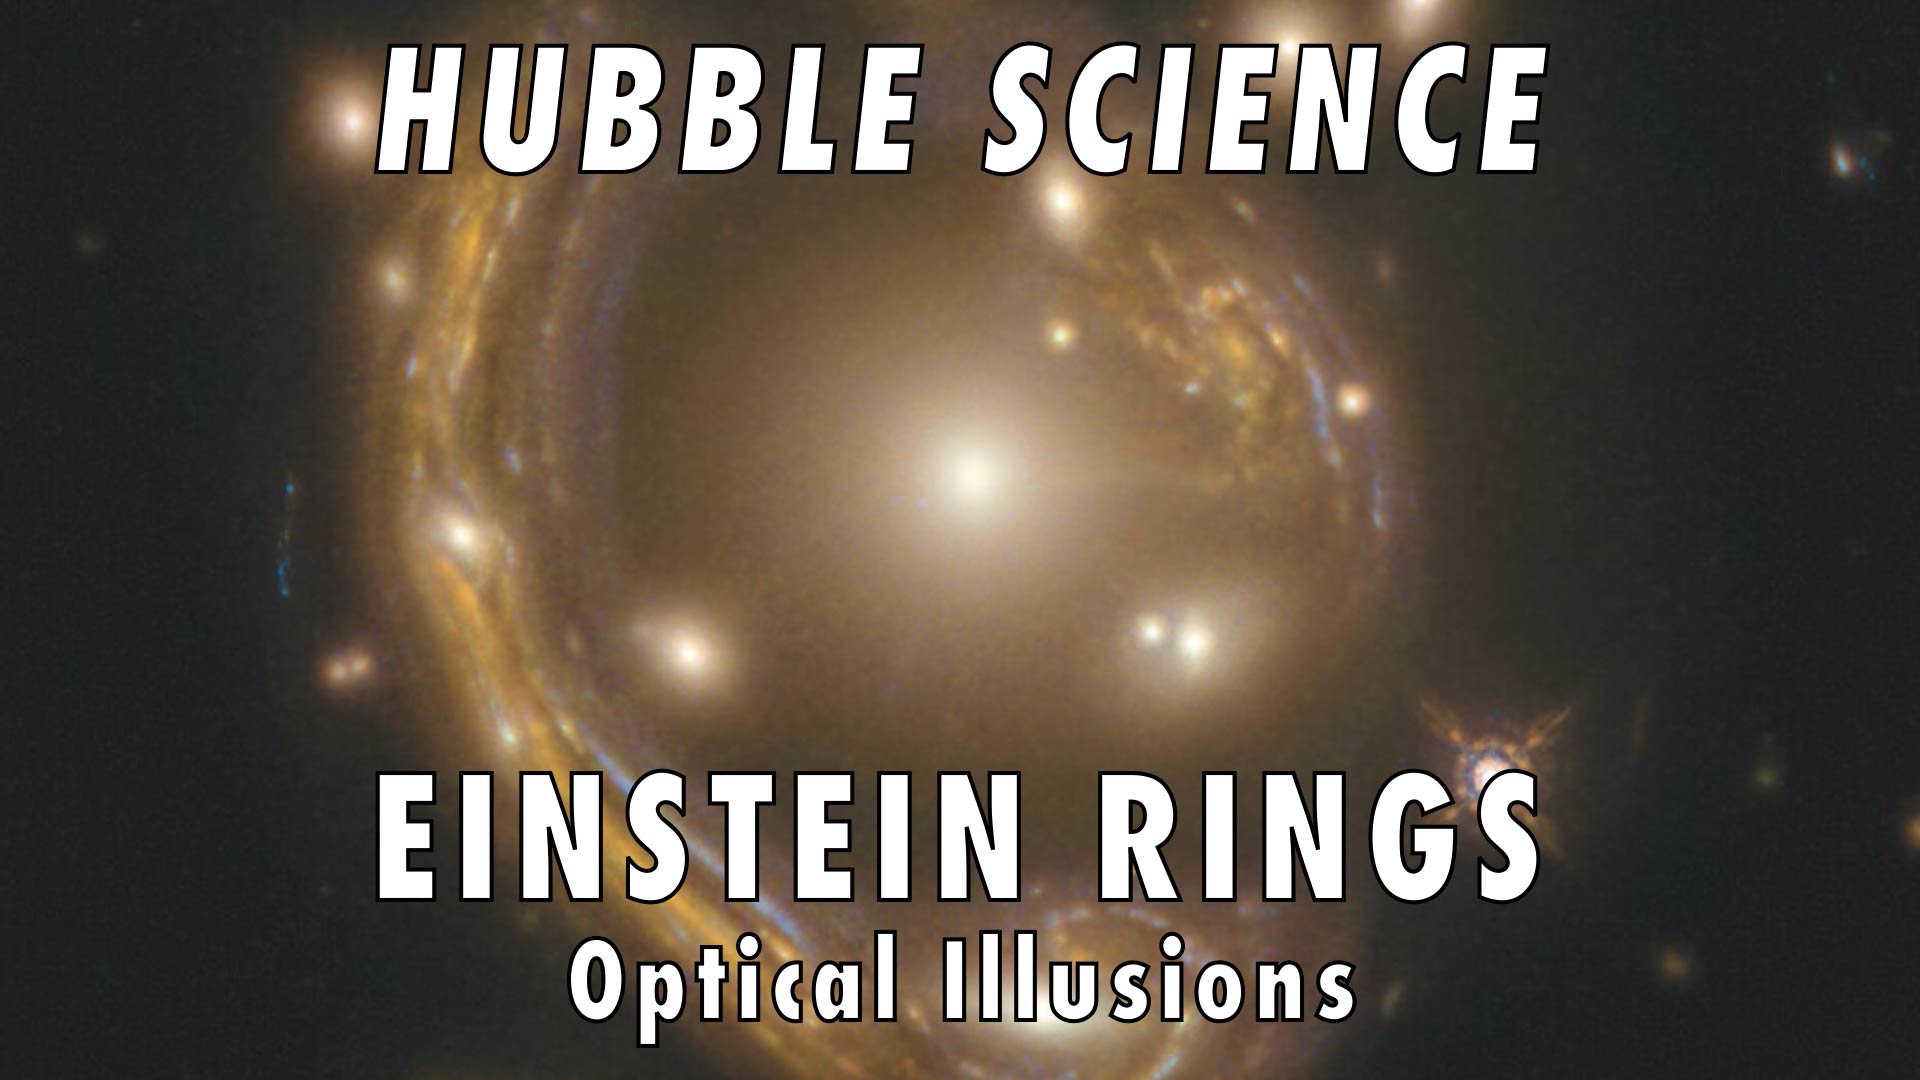 Preview Image for Hubble Science: Einstein Rings, Optical Illusions